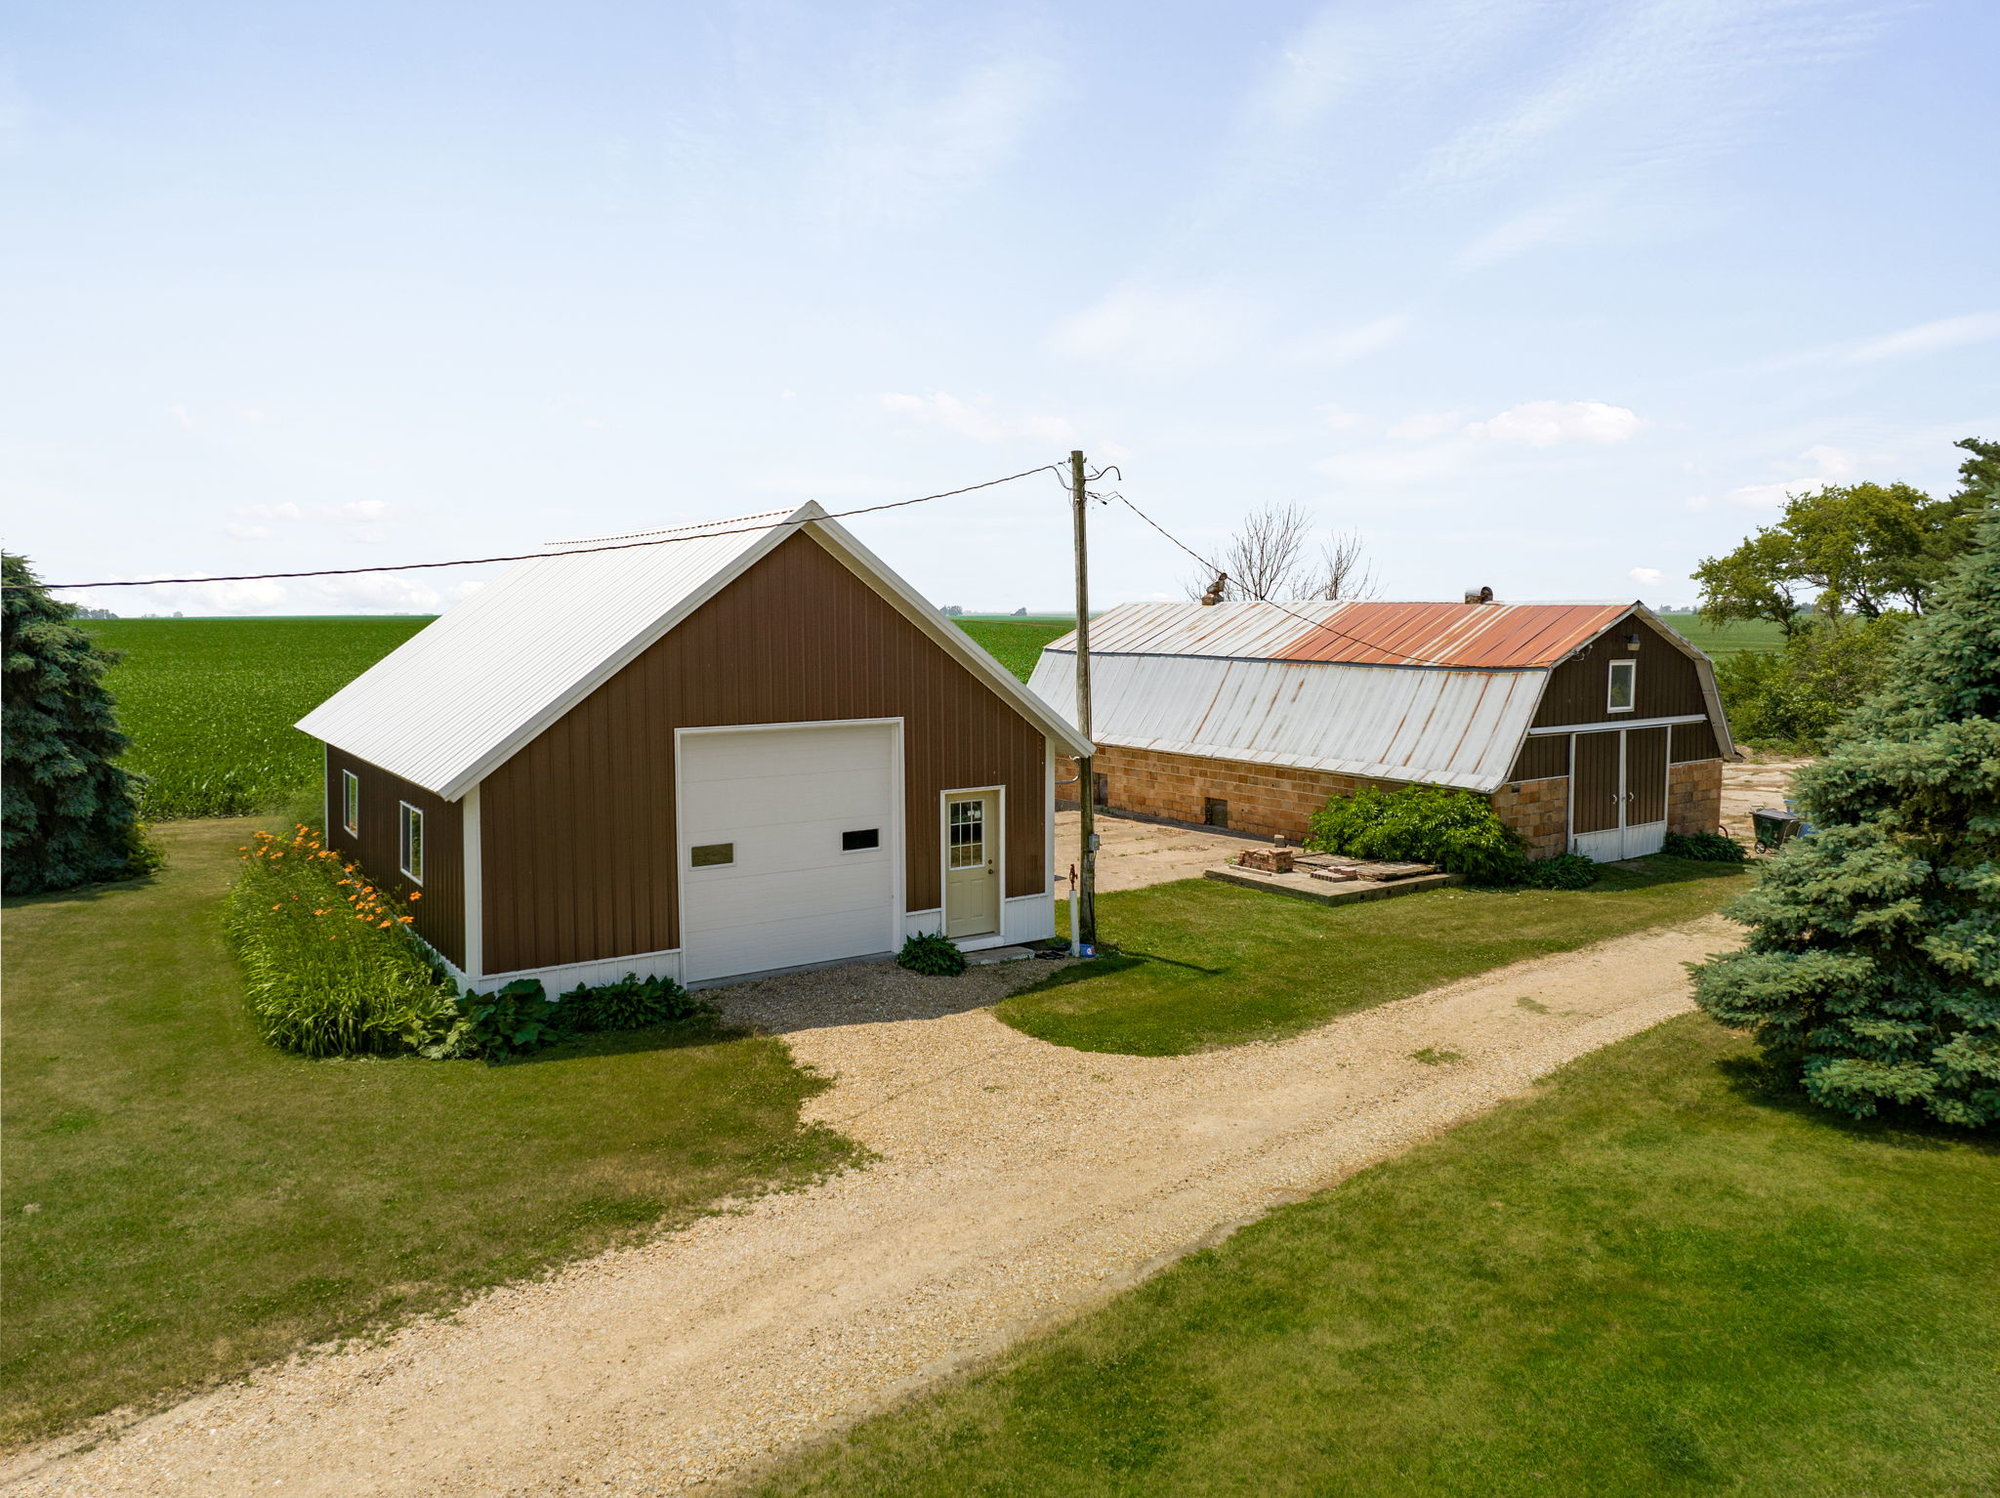 Enjoy Quiet Country Living in a Convenient Location Just Outside of the Cedar Valley - 13014 Gibson Rd., Hudson 3 Bedrooms | 2 Bathrooms | 2,396 Square Feet | 4.08 Acres | 3 Stall Garage | $369,900  Listed by Sara Wegmann, 319.269.4755  Best of both worlds! Enjoy quiet country living with very minimal gravel on this acreage just outside of Cedar Valley. Updates & amenities galore including: private & fenced side yard, water proofed lower level, main floor laundry & bathroom, bonus playroom, enclosed porch, pantry, and triple attached garage. Even better is the BIG bonus in the newly finished, heated/insulated full wired workshop with a 220 outlet perfect for a workshop or entertaining. Established rhubarb, asparagus, blackberries & raspberry bushes, apple & pear trees. Excellent storage throughout! 